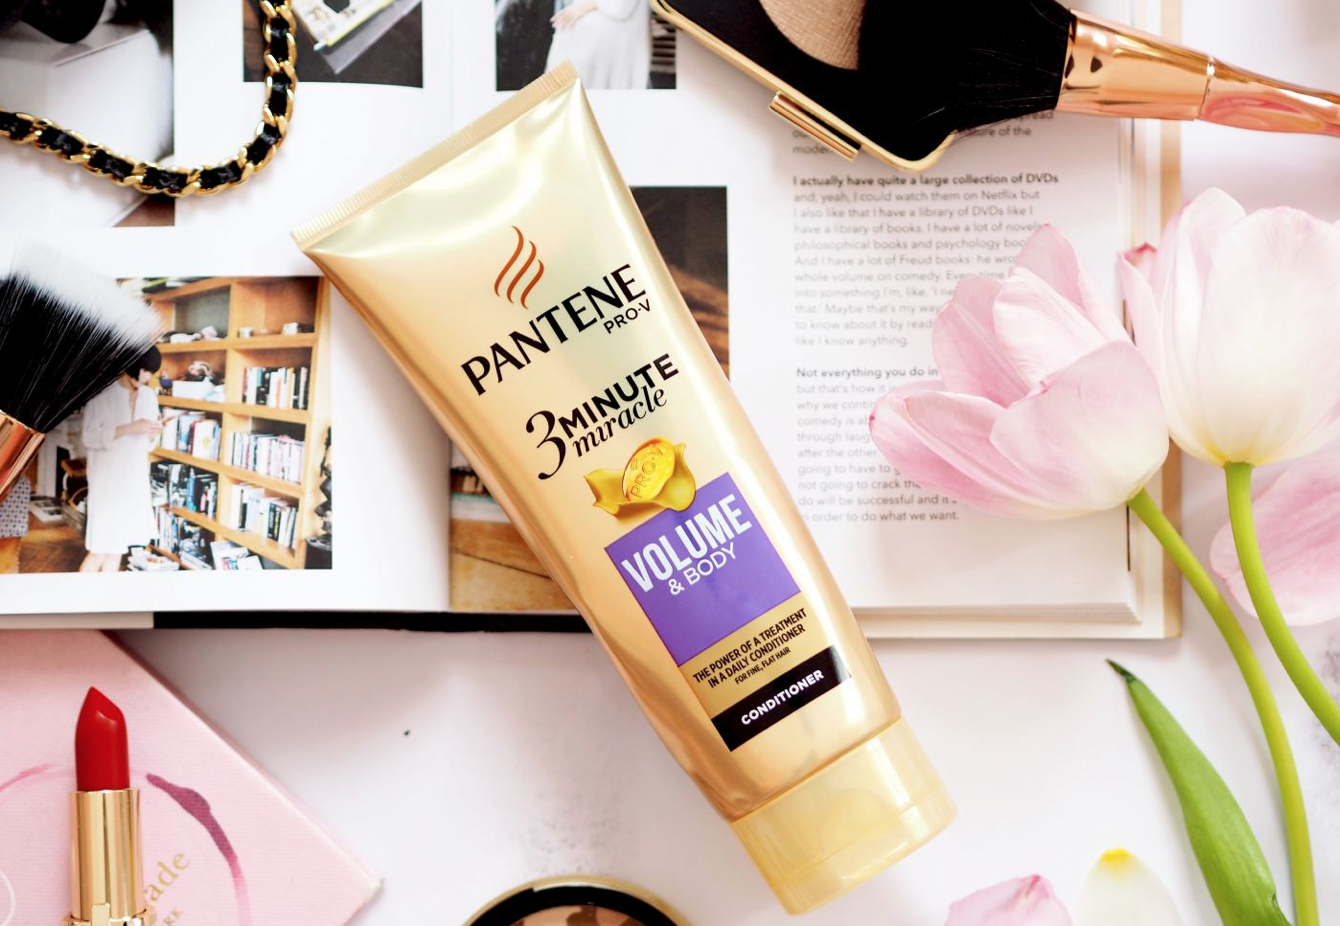 My friends, let me introduce you to my new haircare BBF; the Pantene Pro-V 3 Minute Miracle collection!